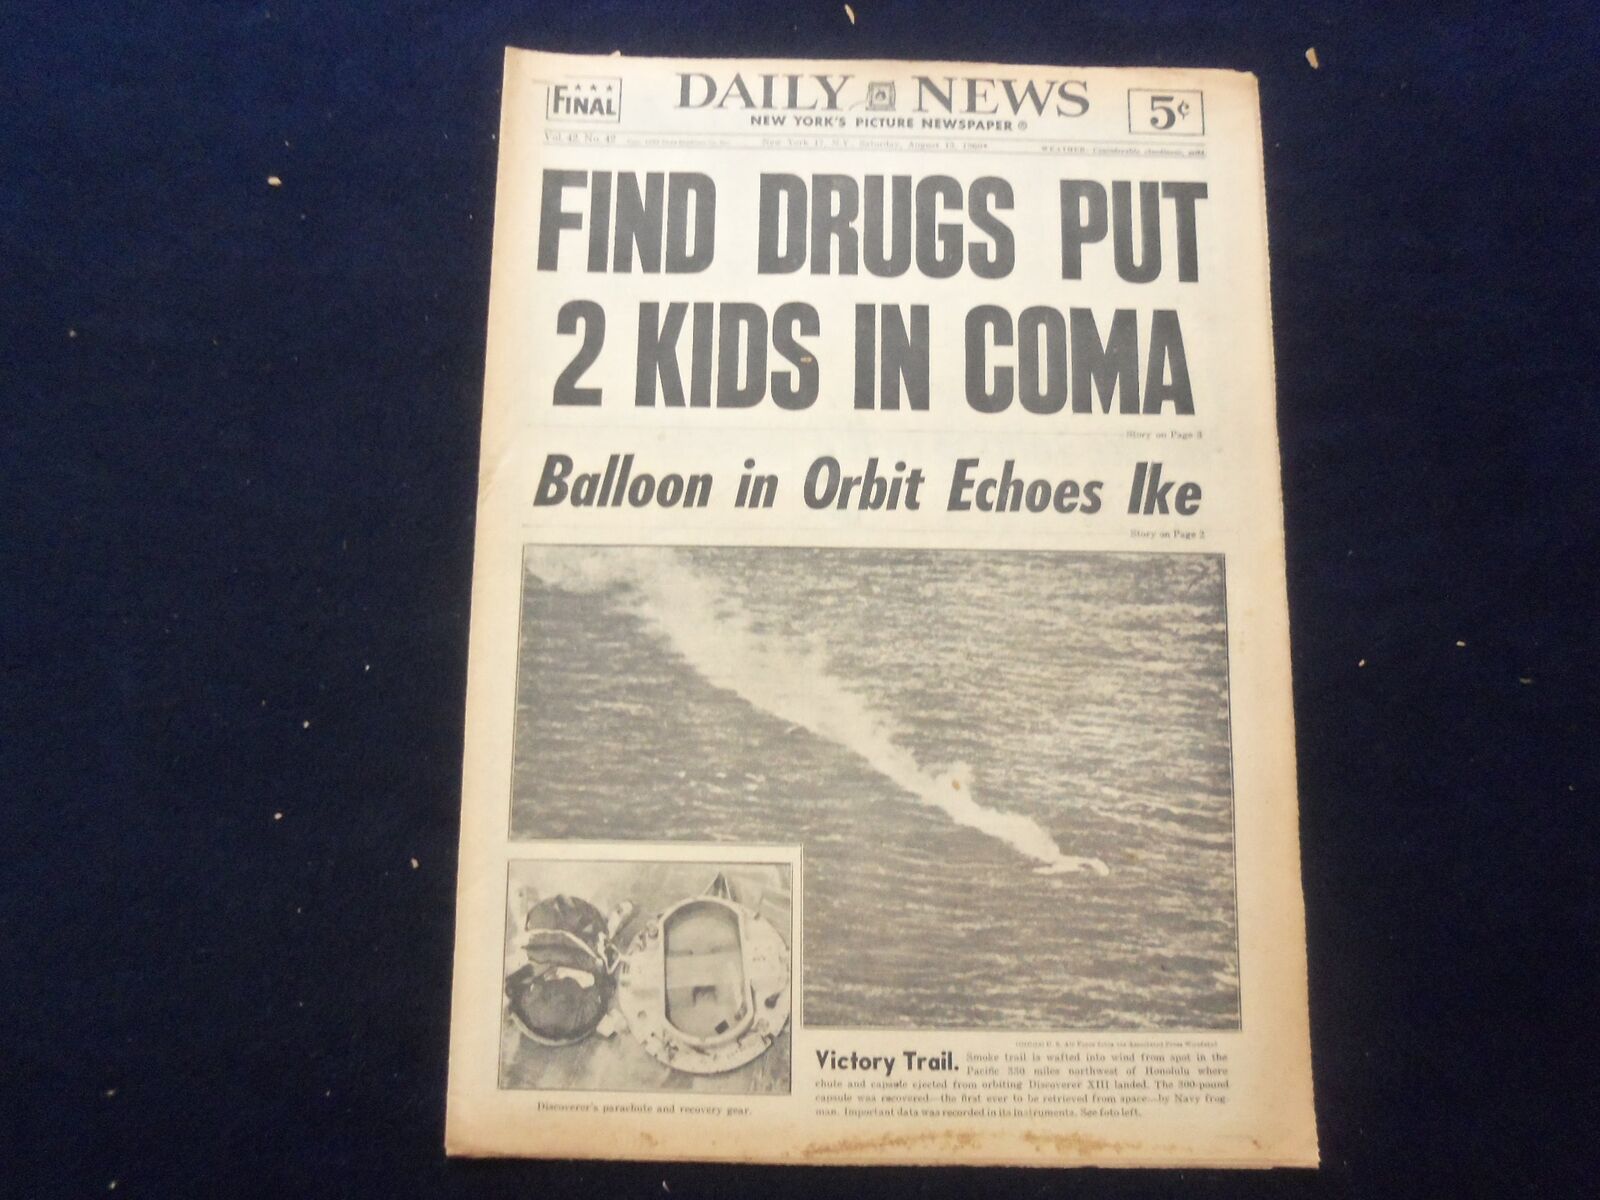 1960 AUG 13 NEW YORK DAILY NEWS NEWSPAPER-FIND DRUGS PUT 2 KIDS IN COMA- NP 6758